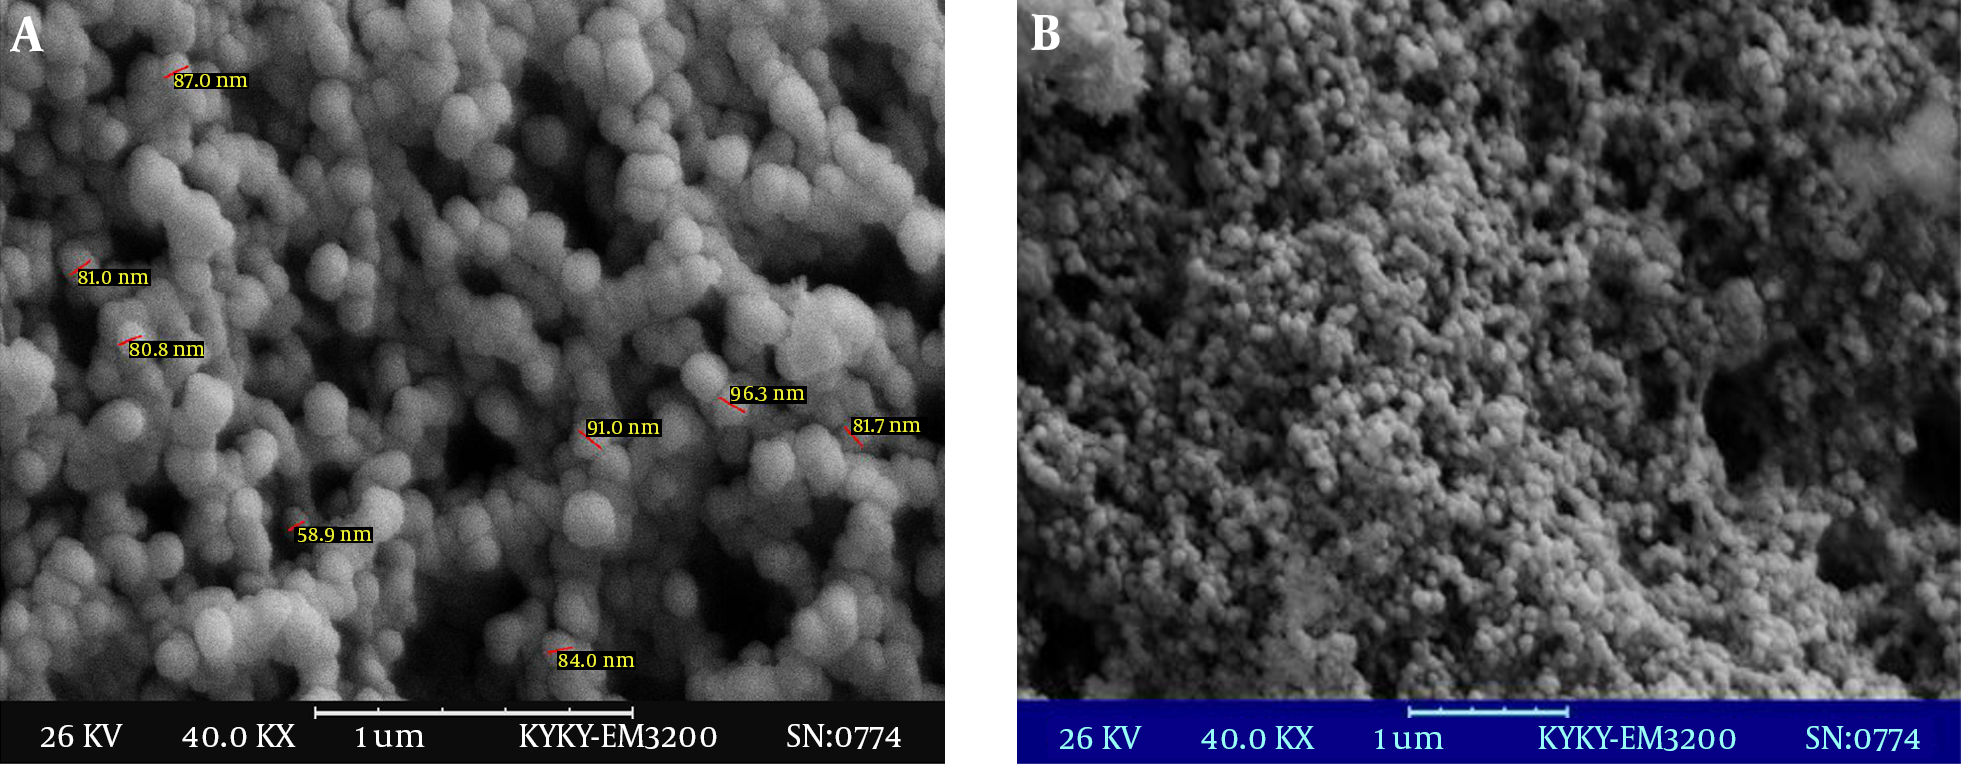 A, Image of Nanopartilces with High Magnification; B, Image of Nanoparticles with Low Magnifications